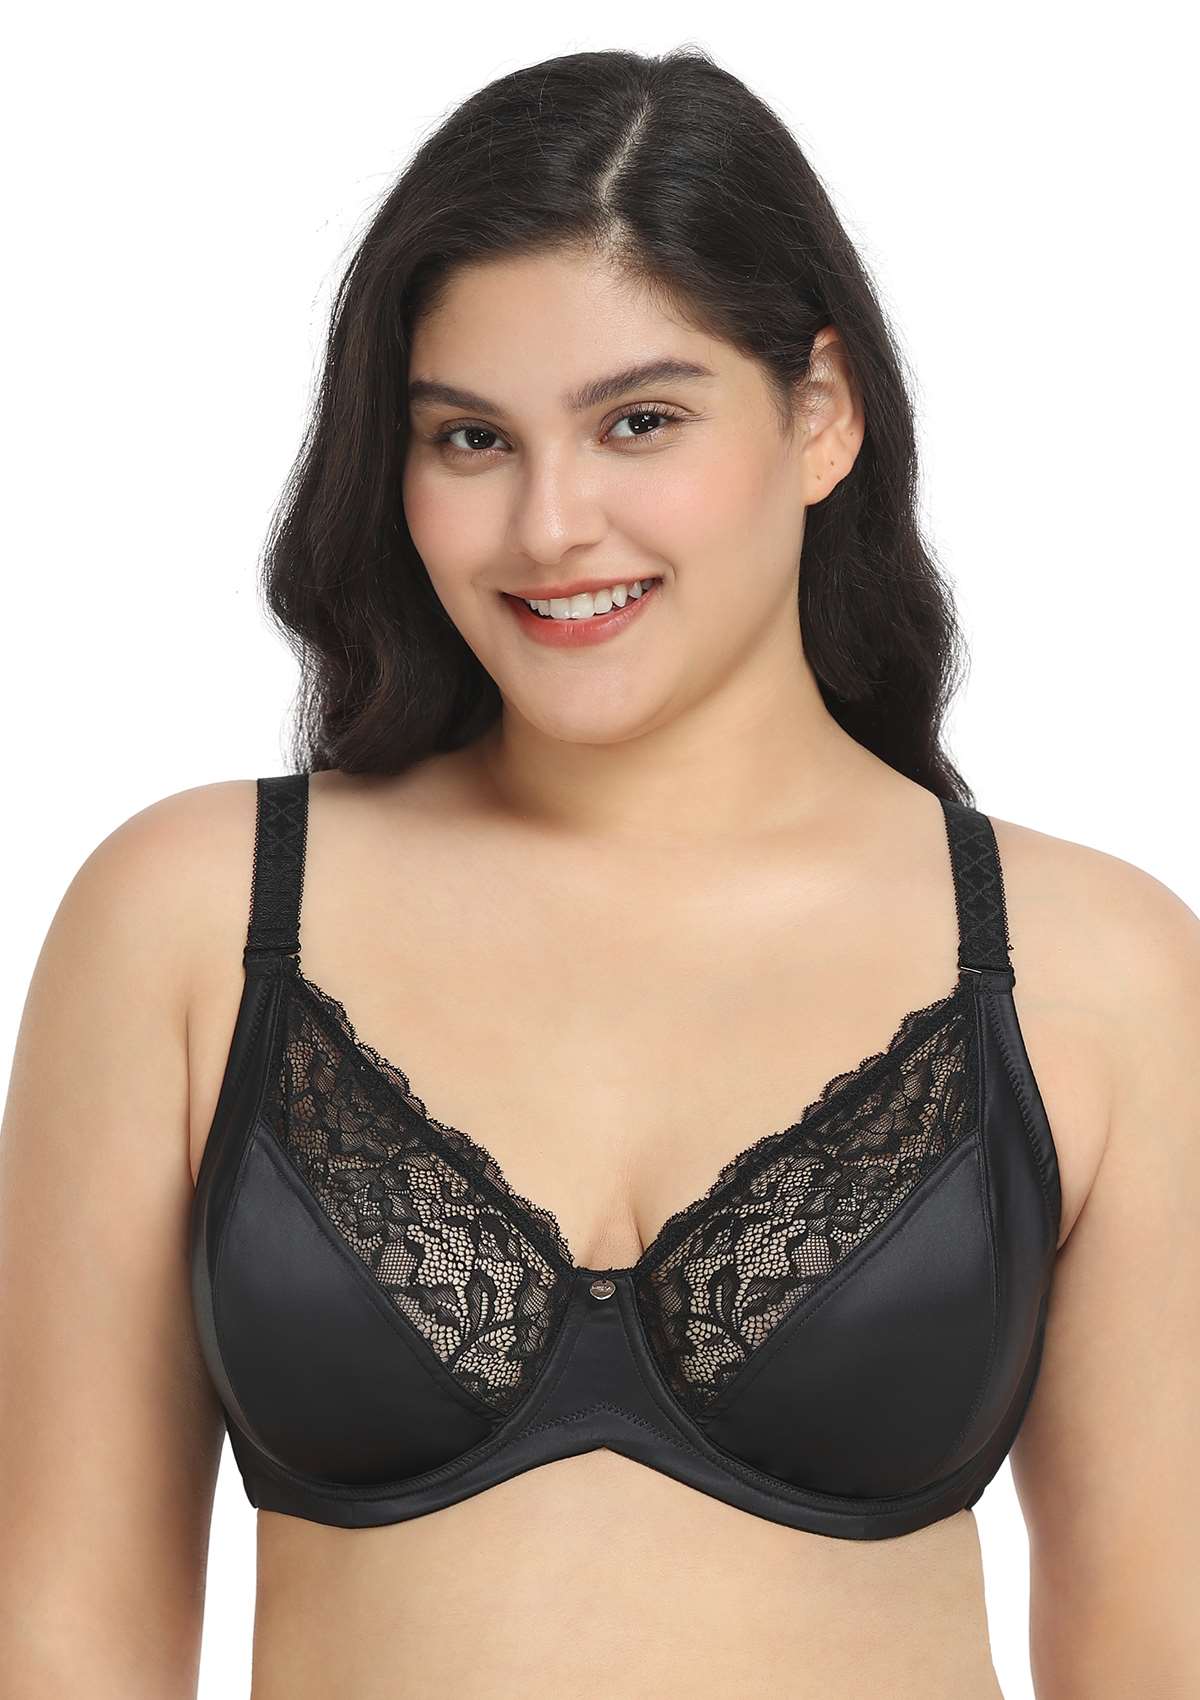 HSIA Foxy Satin Silky Full Coverage Underwire Bra With Floral Lace Trim - Black / 44 / C